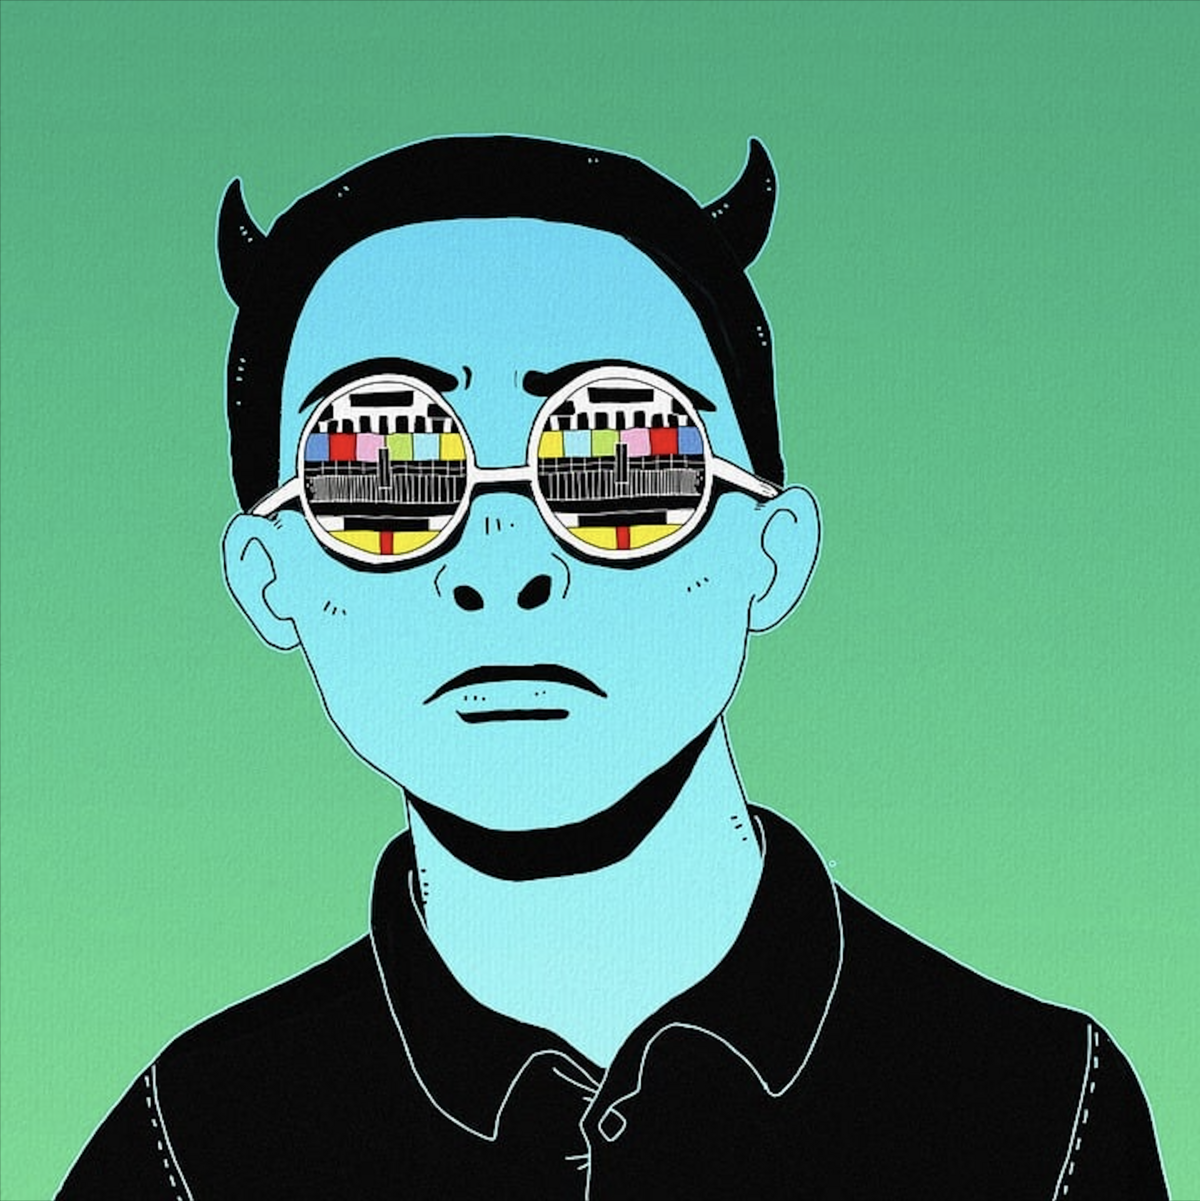 Art of a boy with blue skin, small horns, and colorful glasses, on a green background